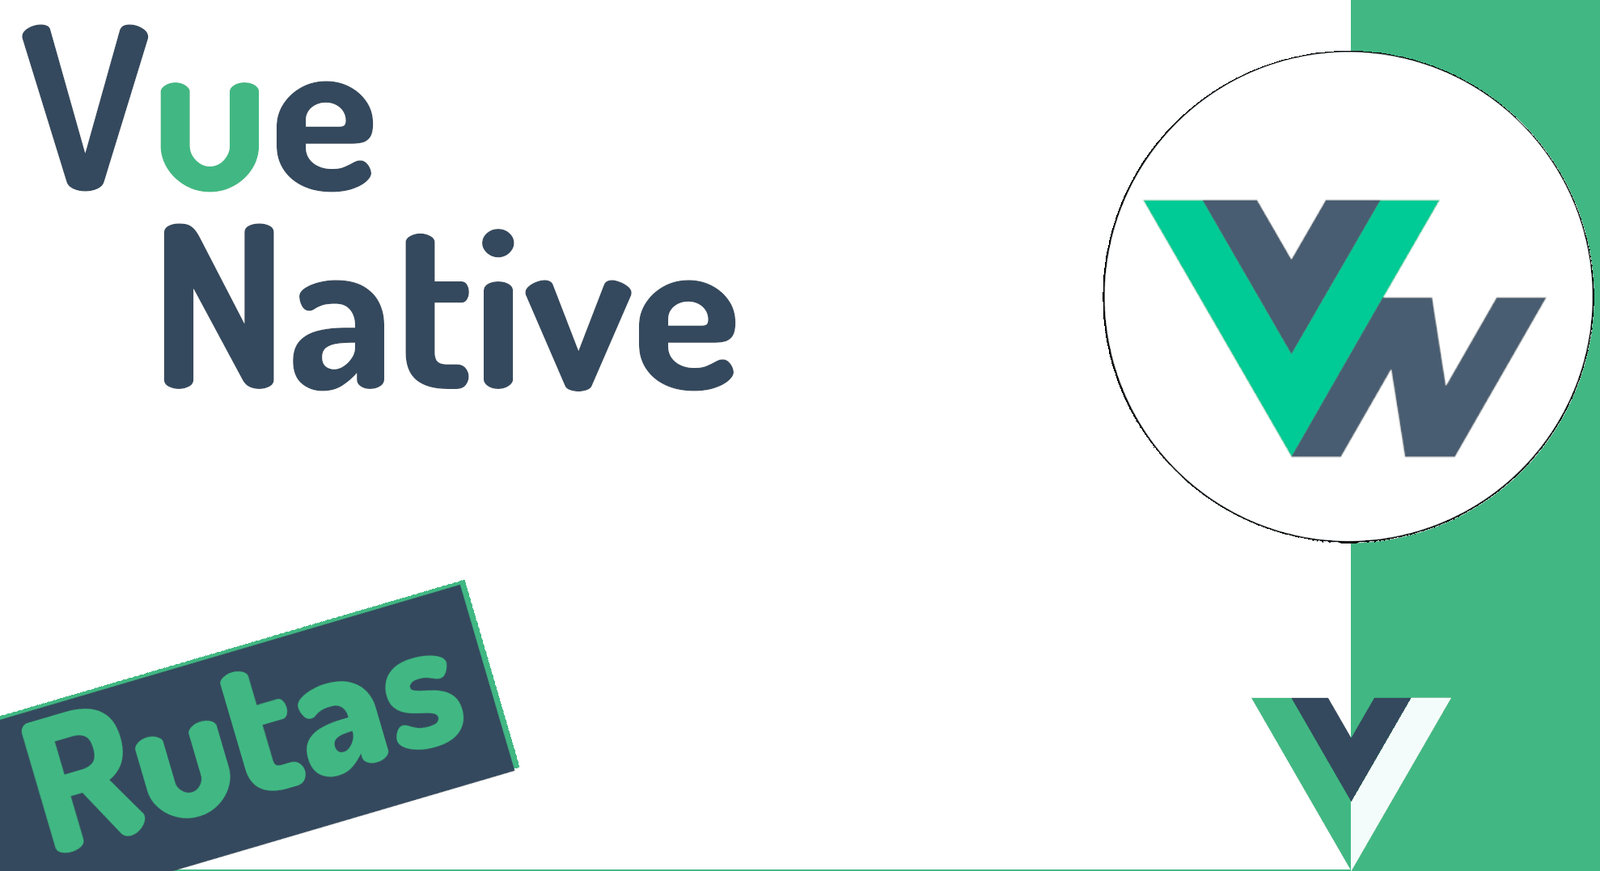 Creating your first application with Vue Native Router